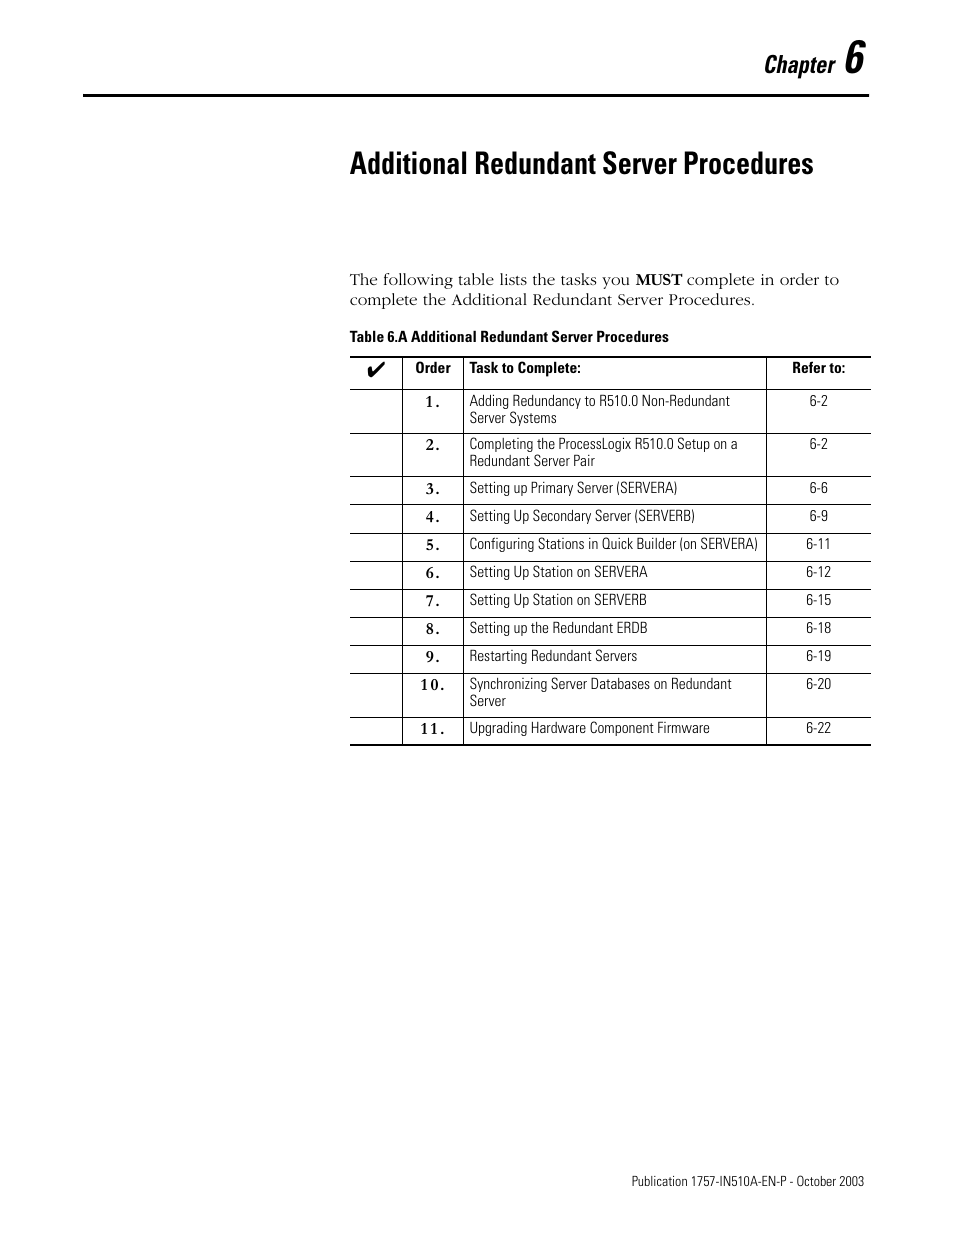 6 - additional redundant server procedures, Chapter 6, Additional redundant server procedures | Chapter | Rockwell Automation 1757-SWKIT5100 ProcessLogix R510.0 Installation and Upgrade Guide User Manual | Page 161 / 271